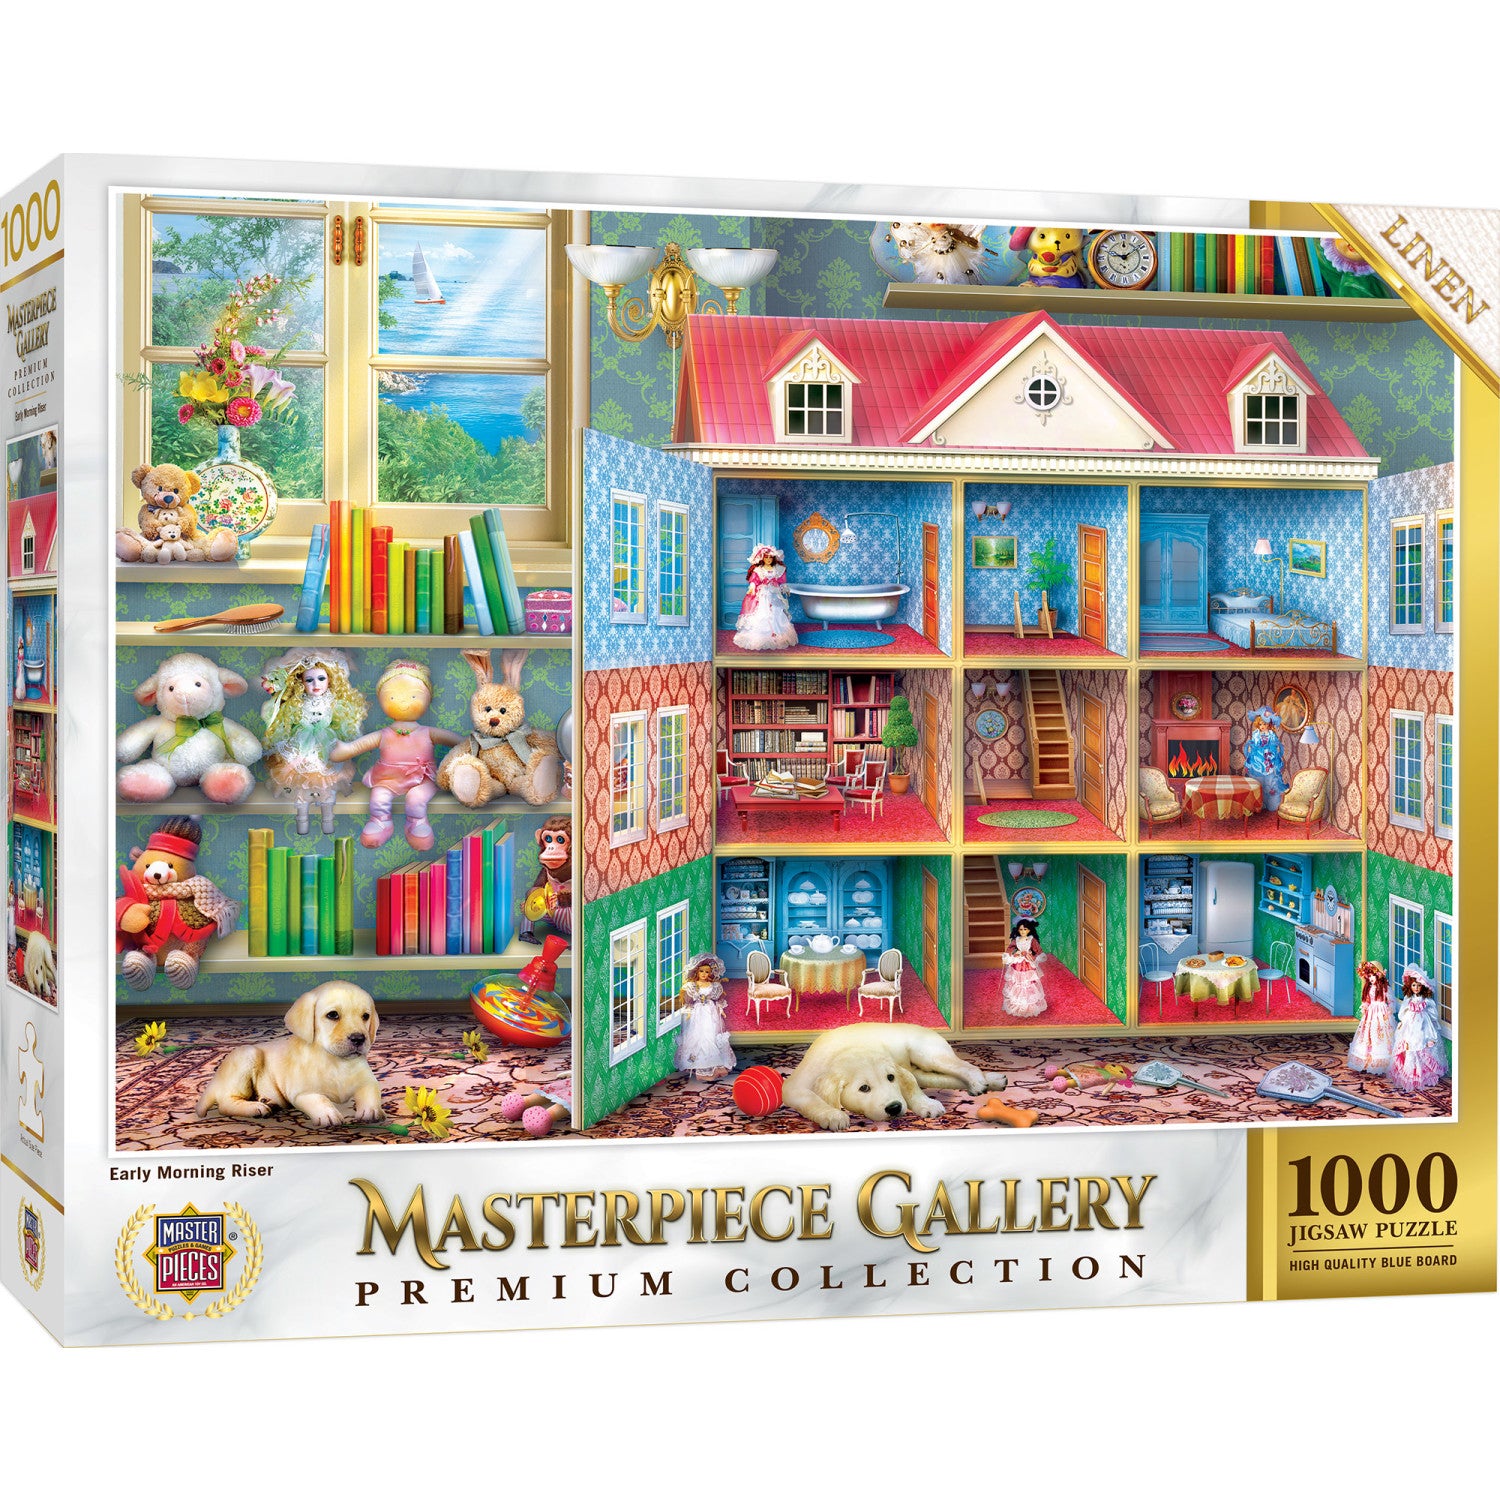 Masterpiece Gallery - Early Monring Riser 1000 Piece Jigsaw Puzzle